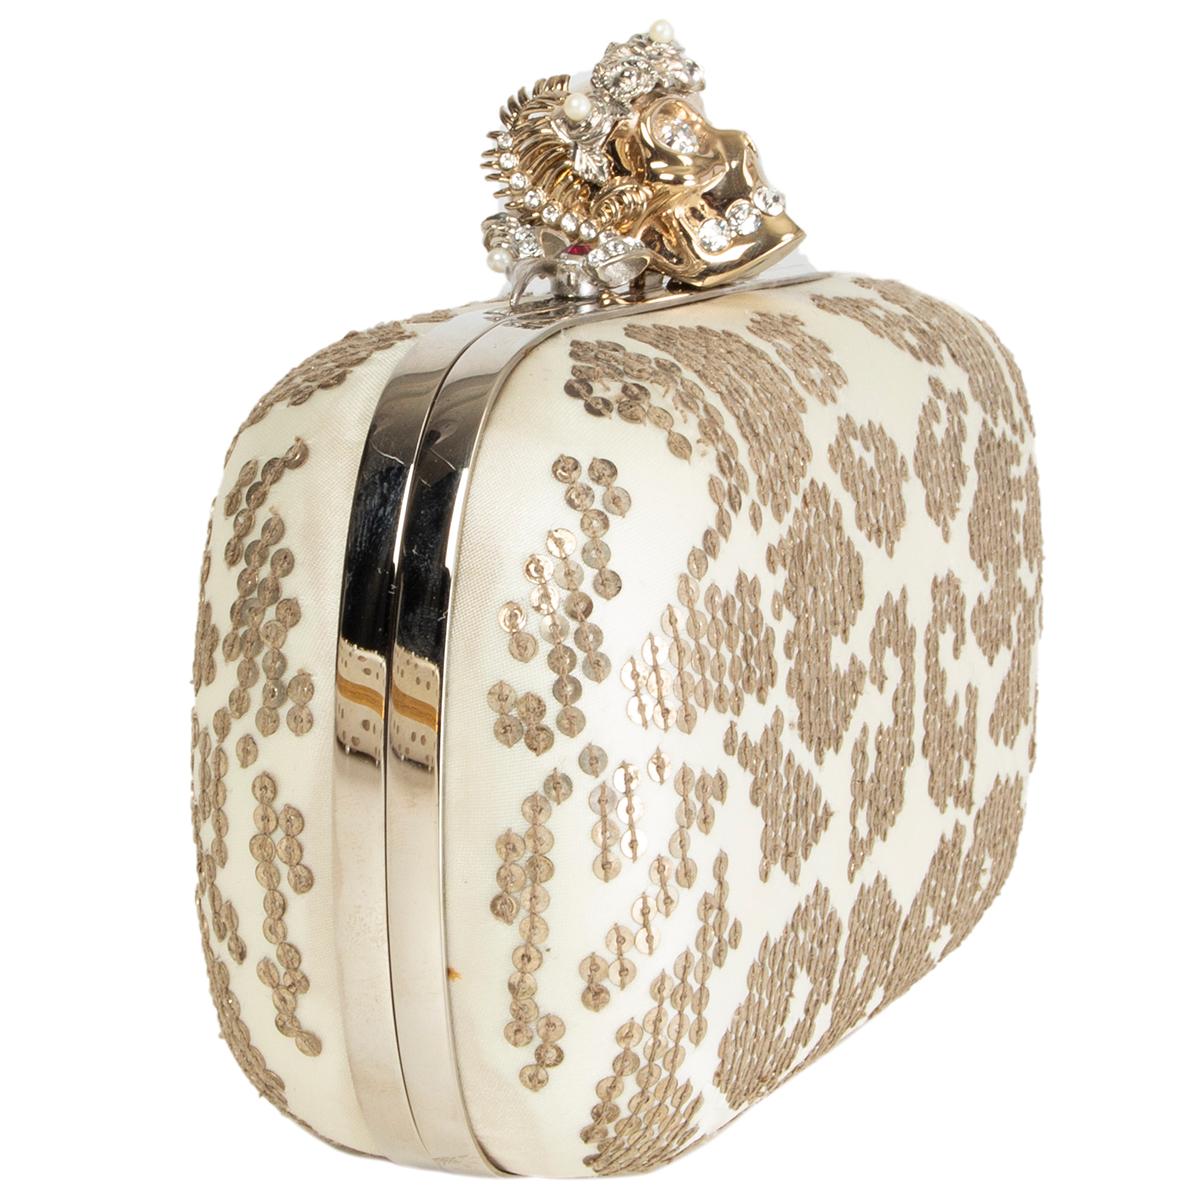 Alexander McQueen skull box clutch in off-white satin embellshed with antique silver-tone sequins and light gold-tone skull closure with crystal eyes and teeth. Lined in off-white calfskin. Has been carried with some oft discoloration on the buttom.